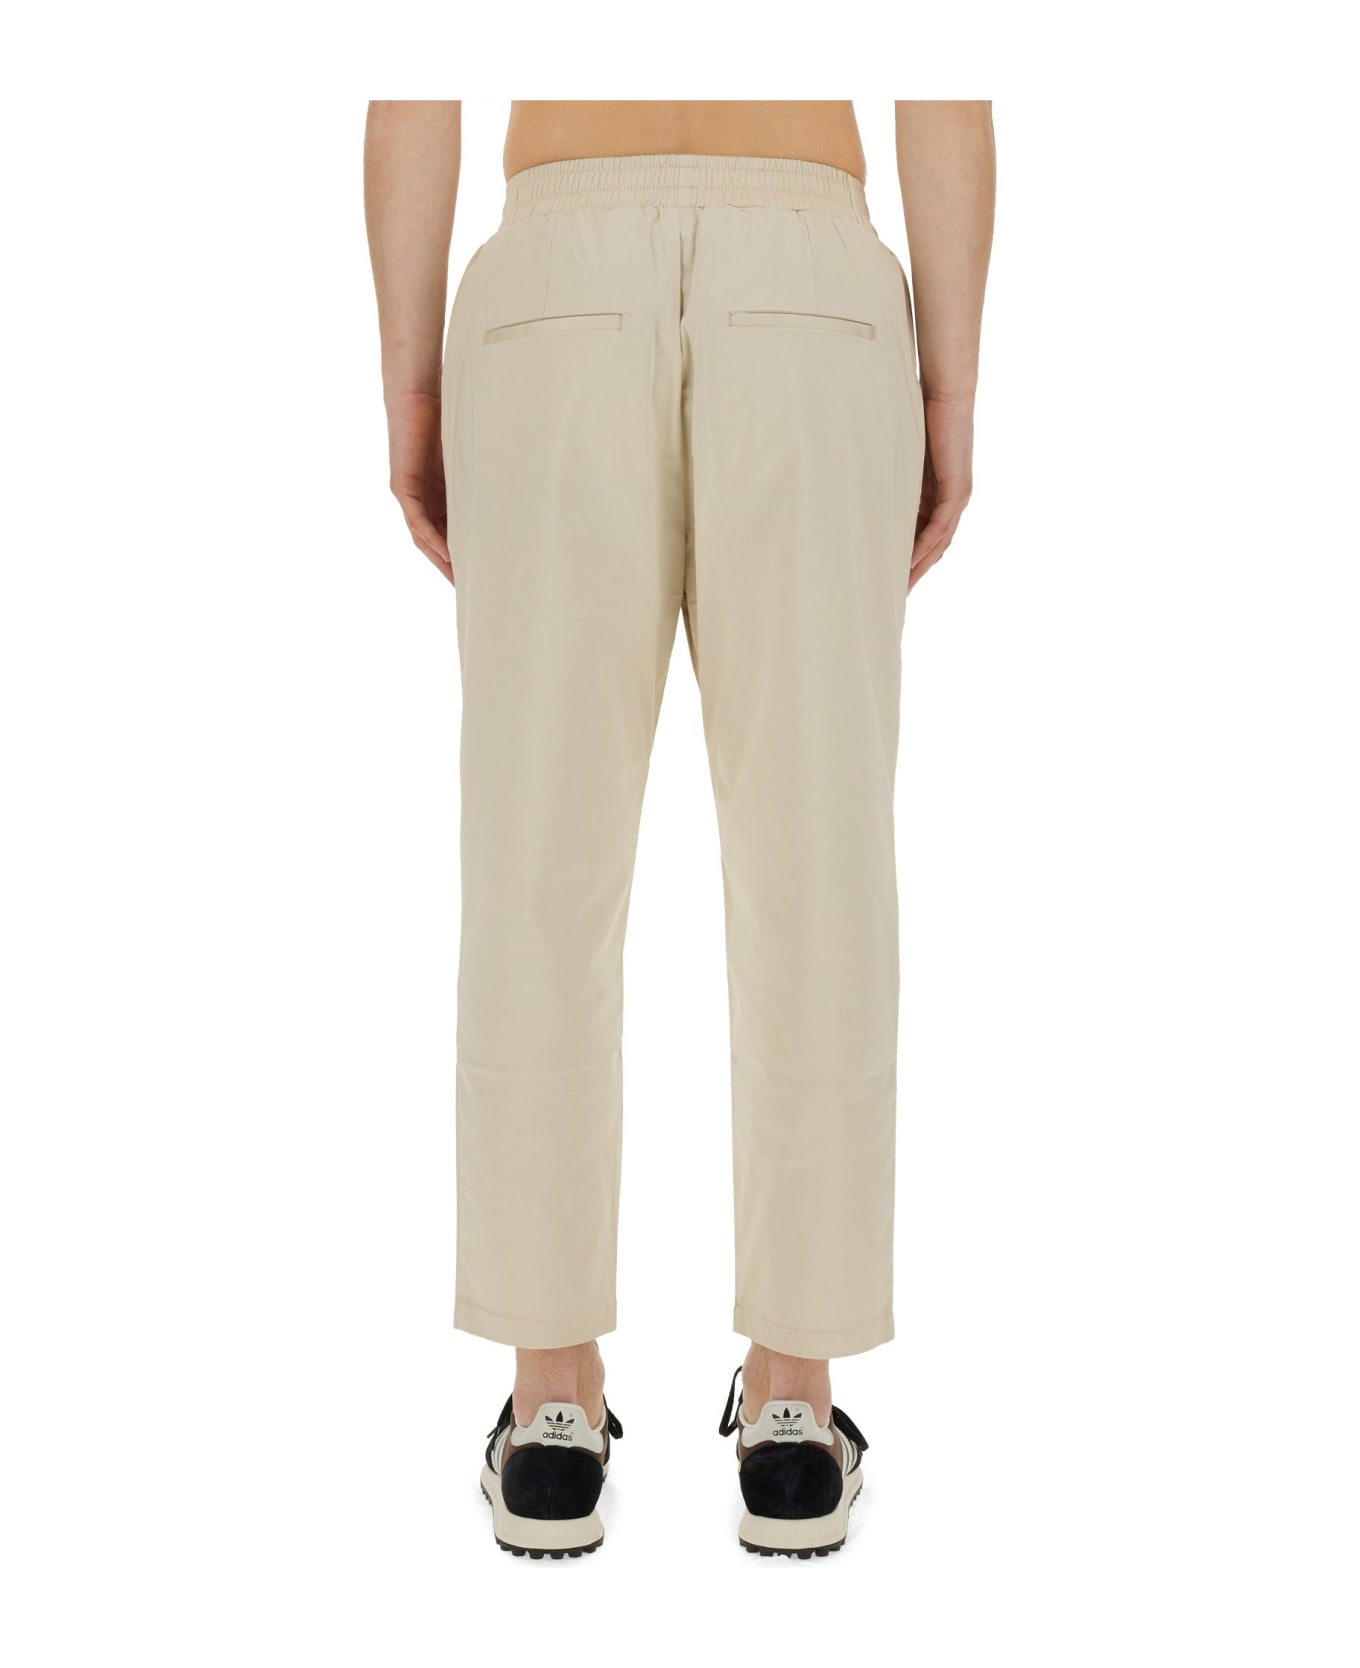 Family First Milano Chino Pants - NEUTRALS ボトムス